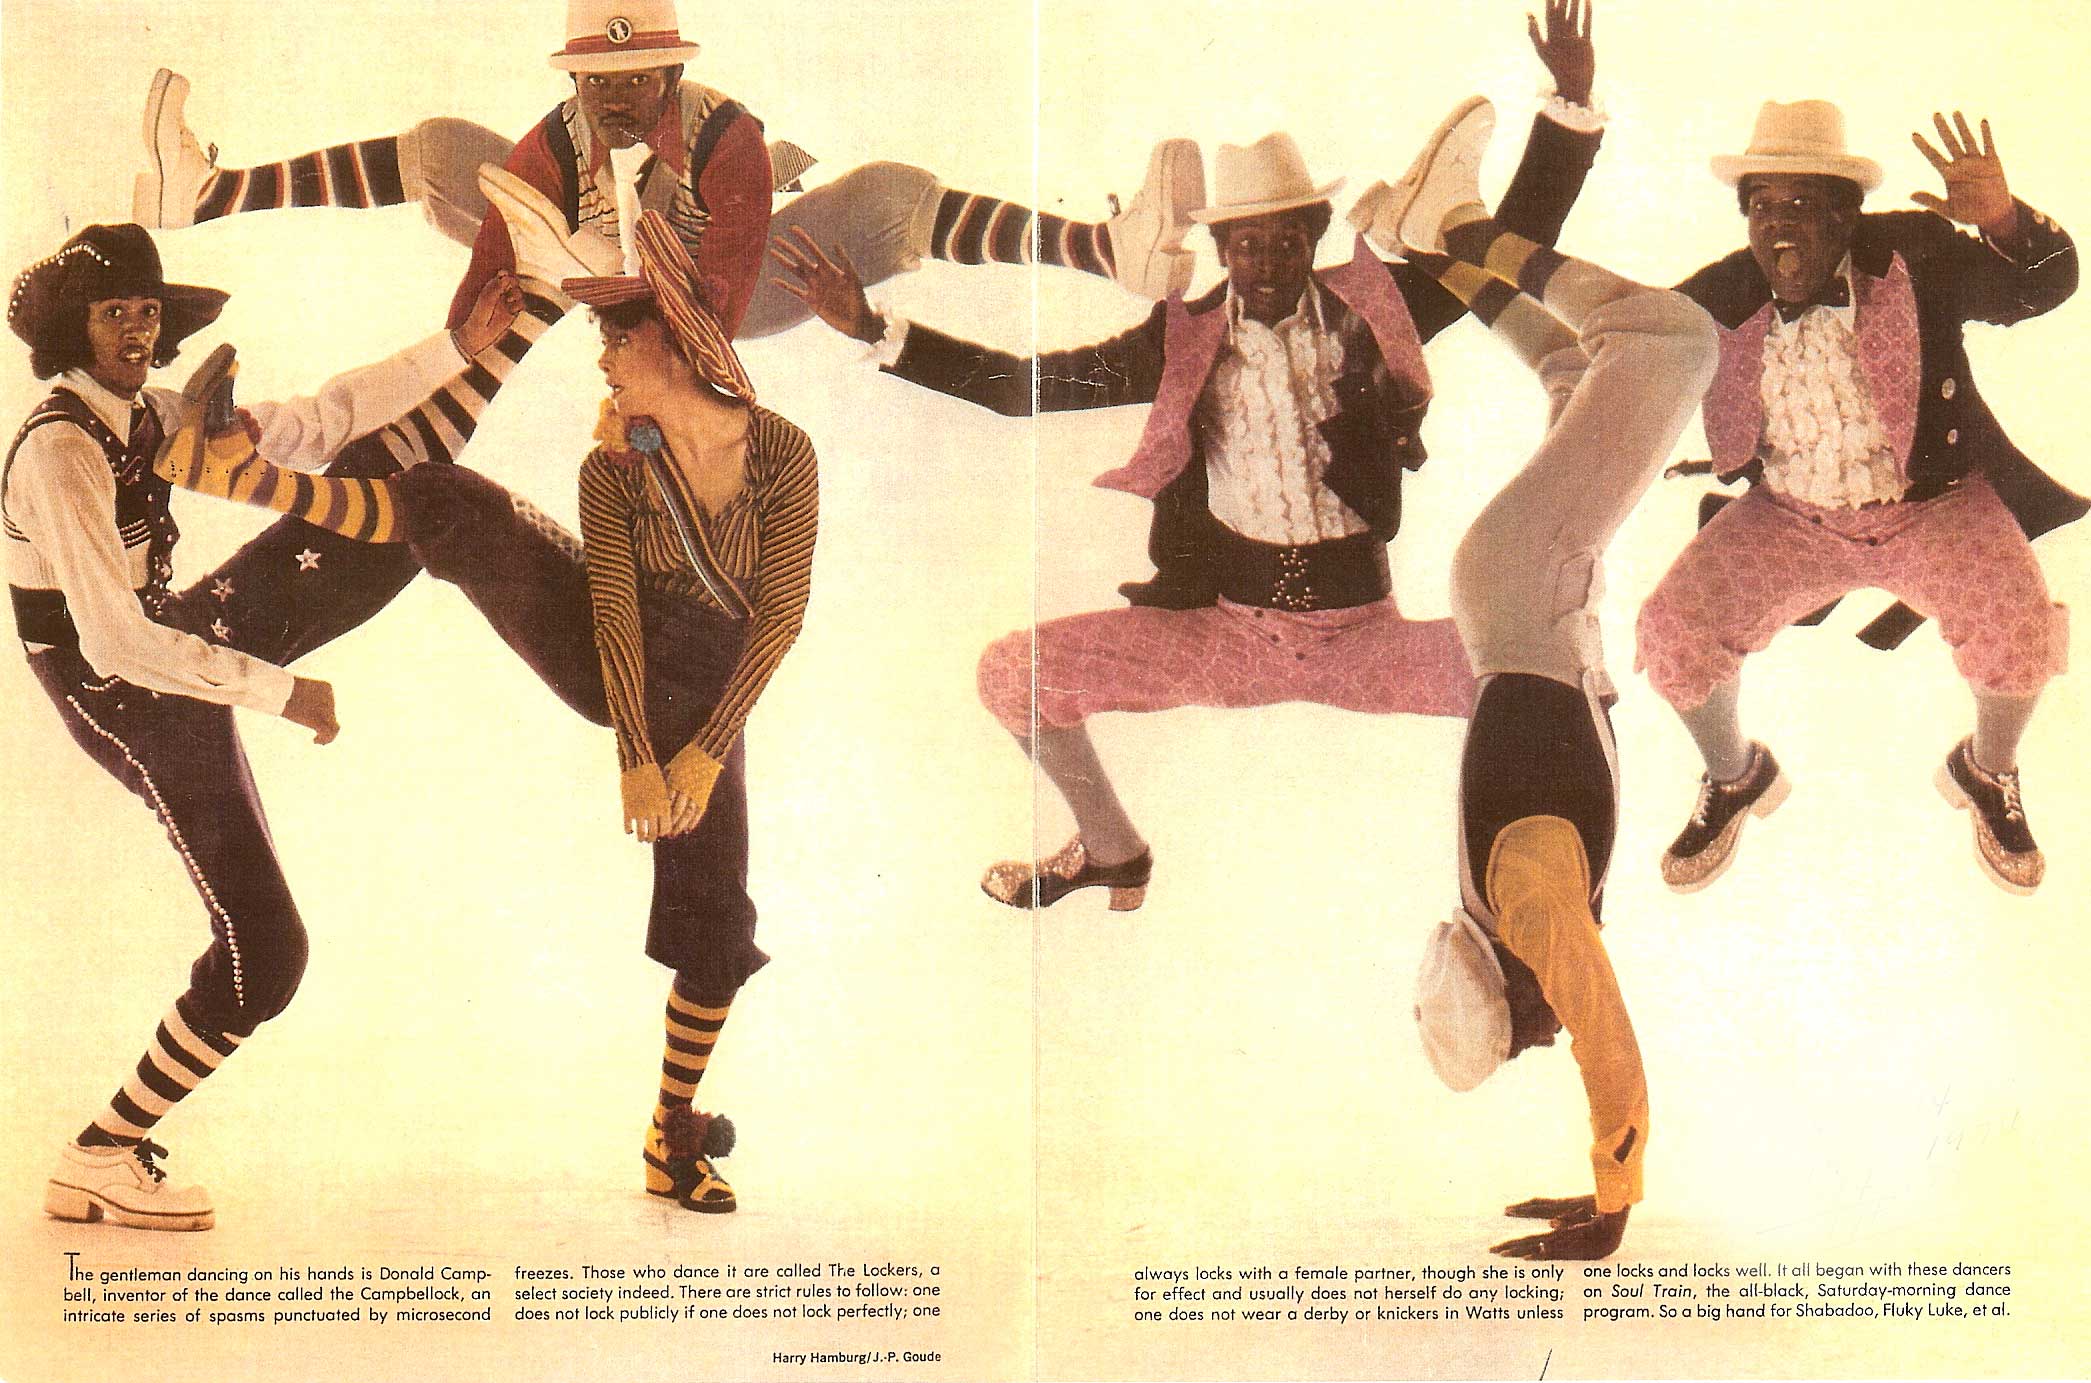 The Lockers: 1970s Soul Train Dancers Who Made Us Pop, Lock And Electric Boogaloo